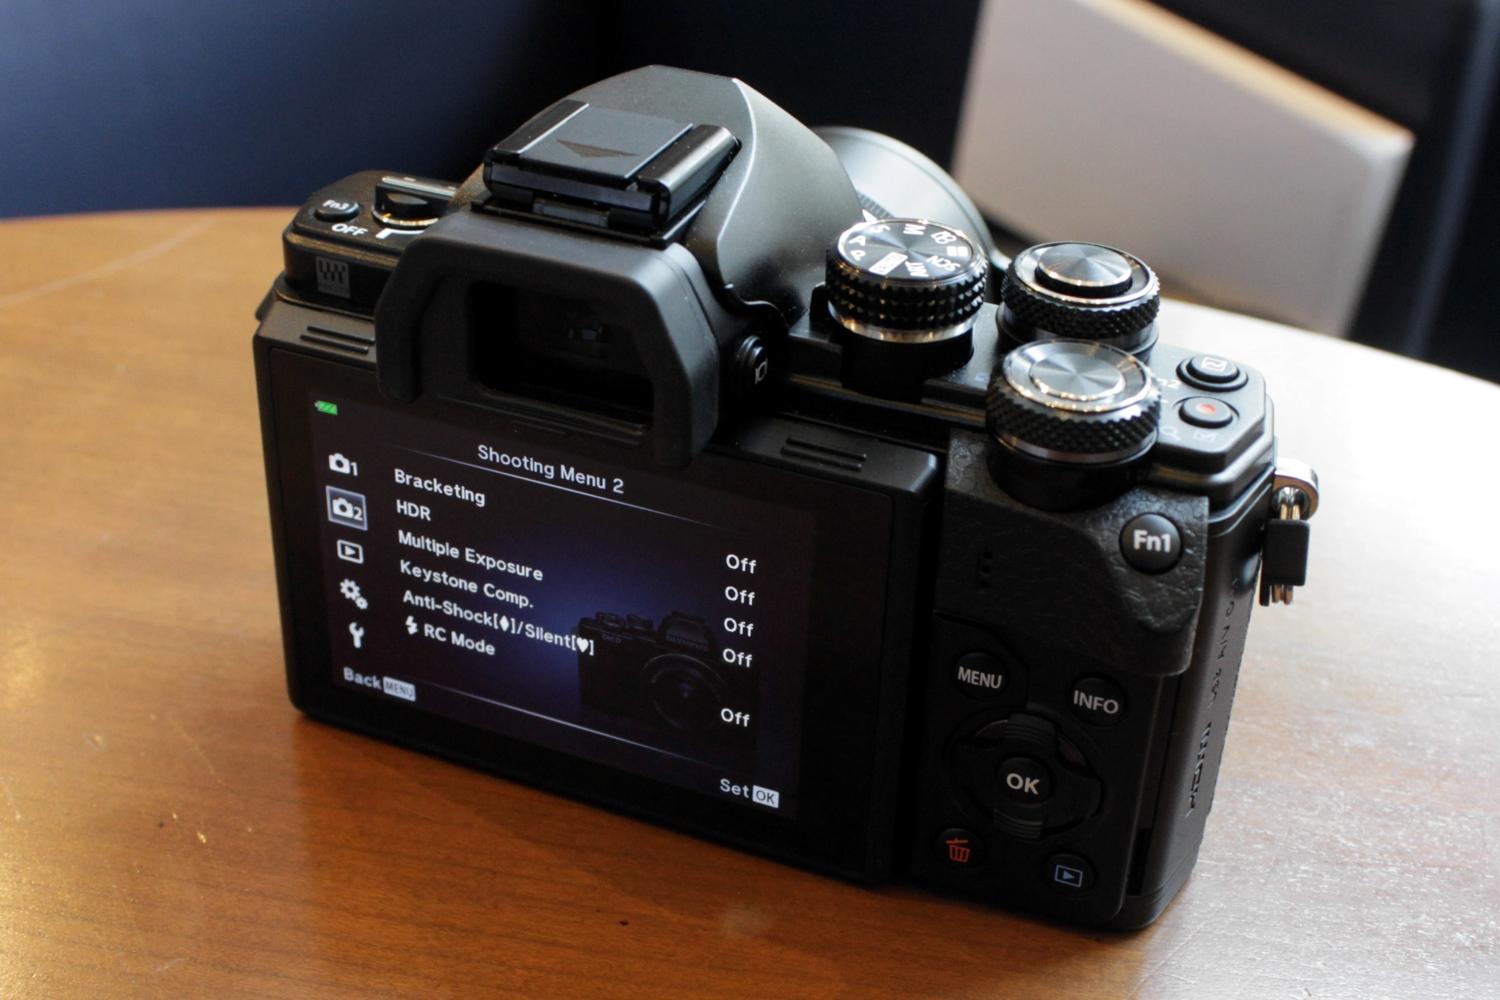 olympus gives entry level om d e m10 mirrorless camera big upgrades e10mkii 24